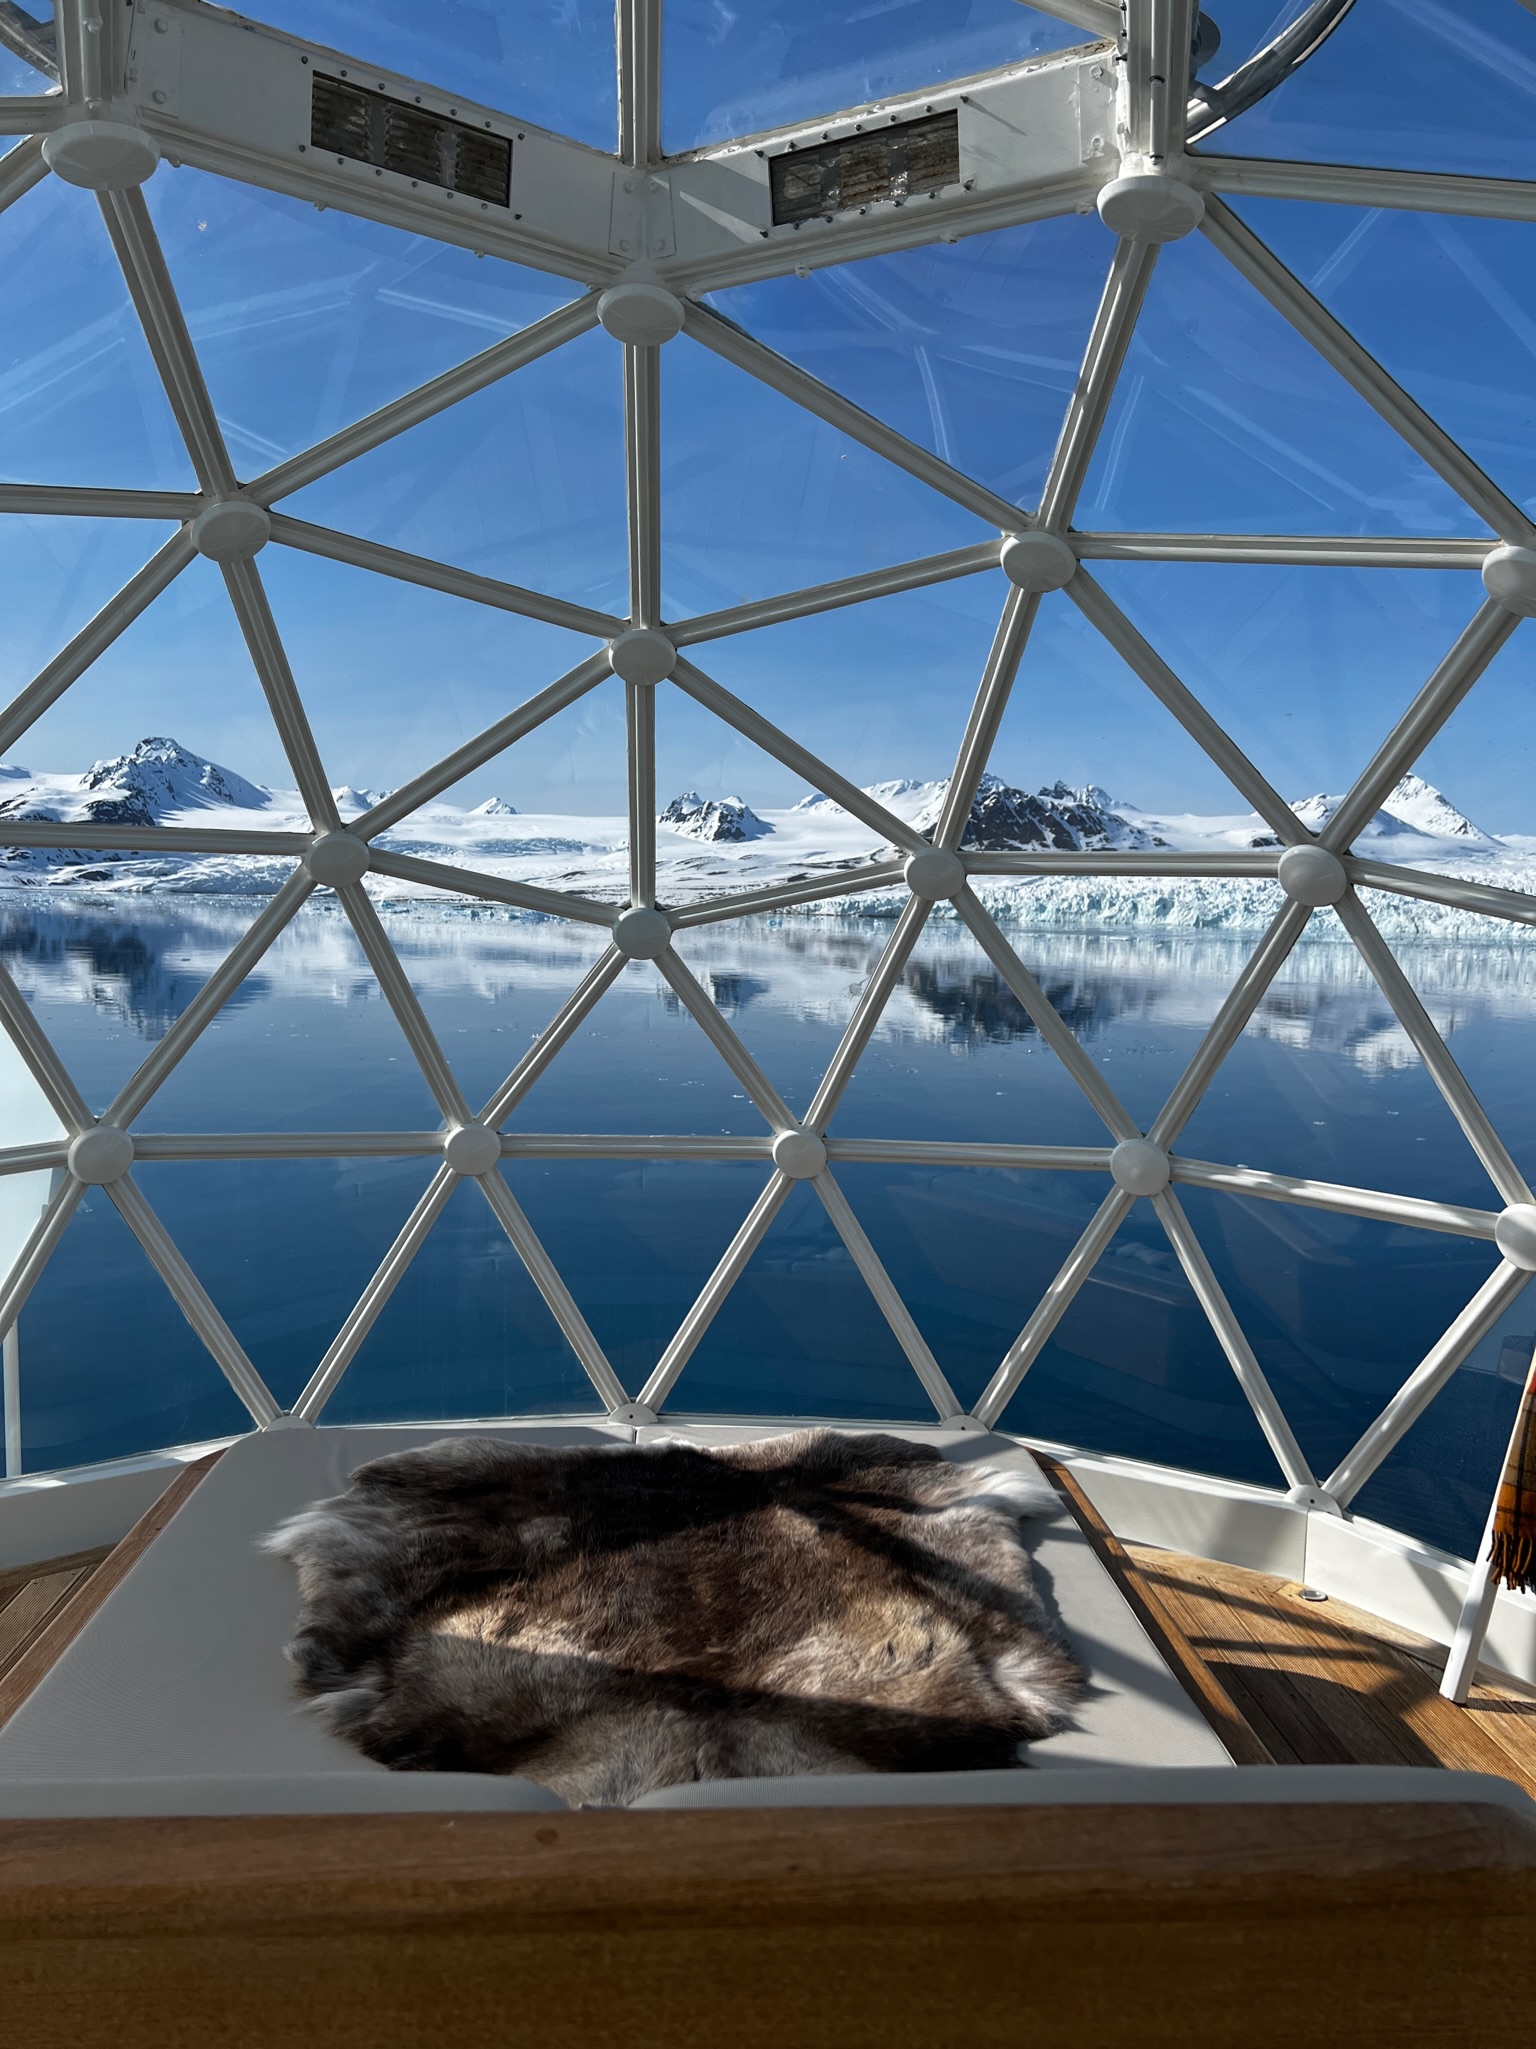 Sleeping in an igloo during my recent journey in the arctic.